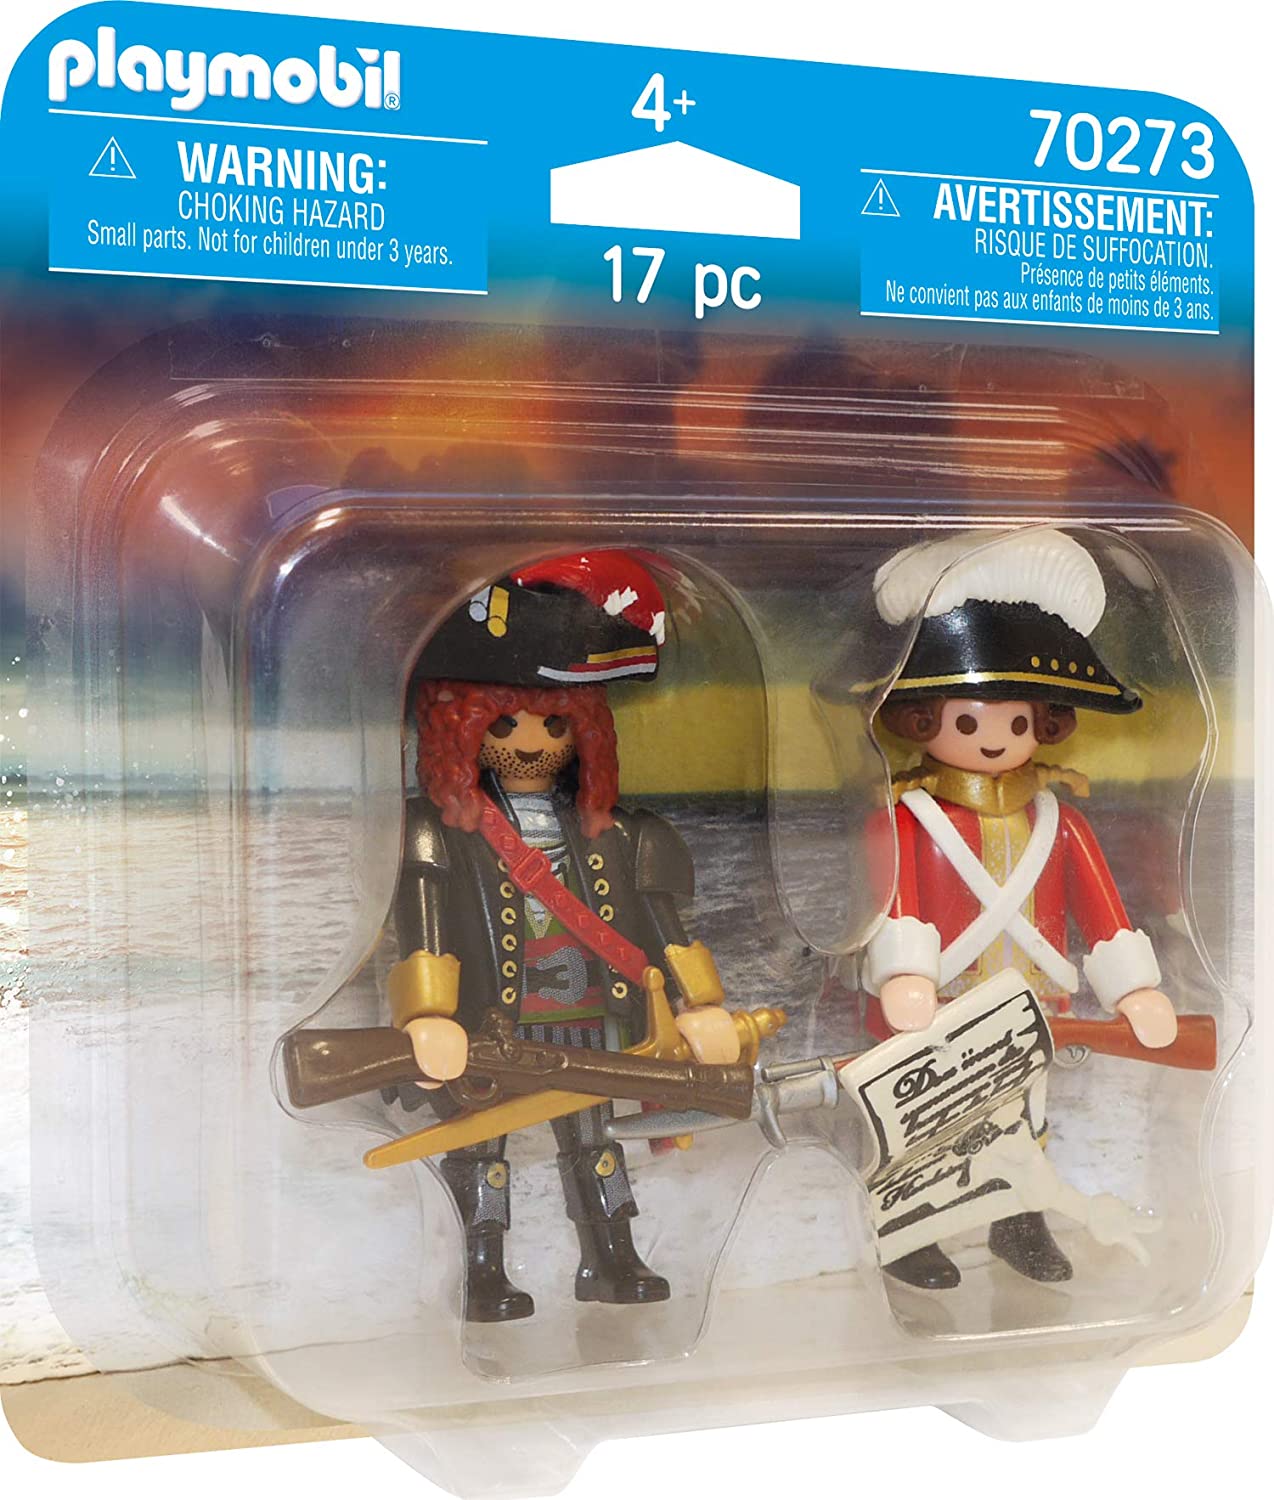 PLAYMOBIL DuoPacks 70273 Pirate Captain and Rotskirt for Age 4 and Above